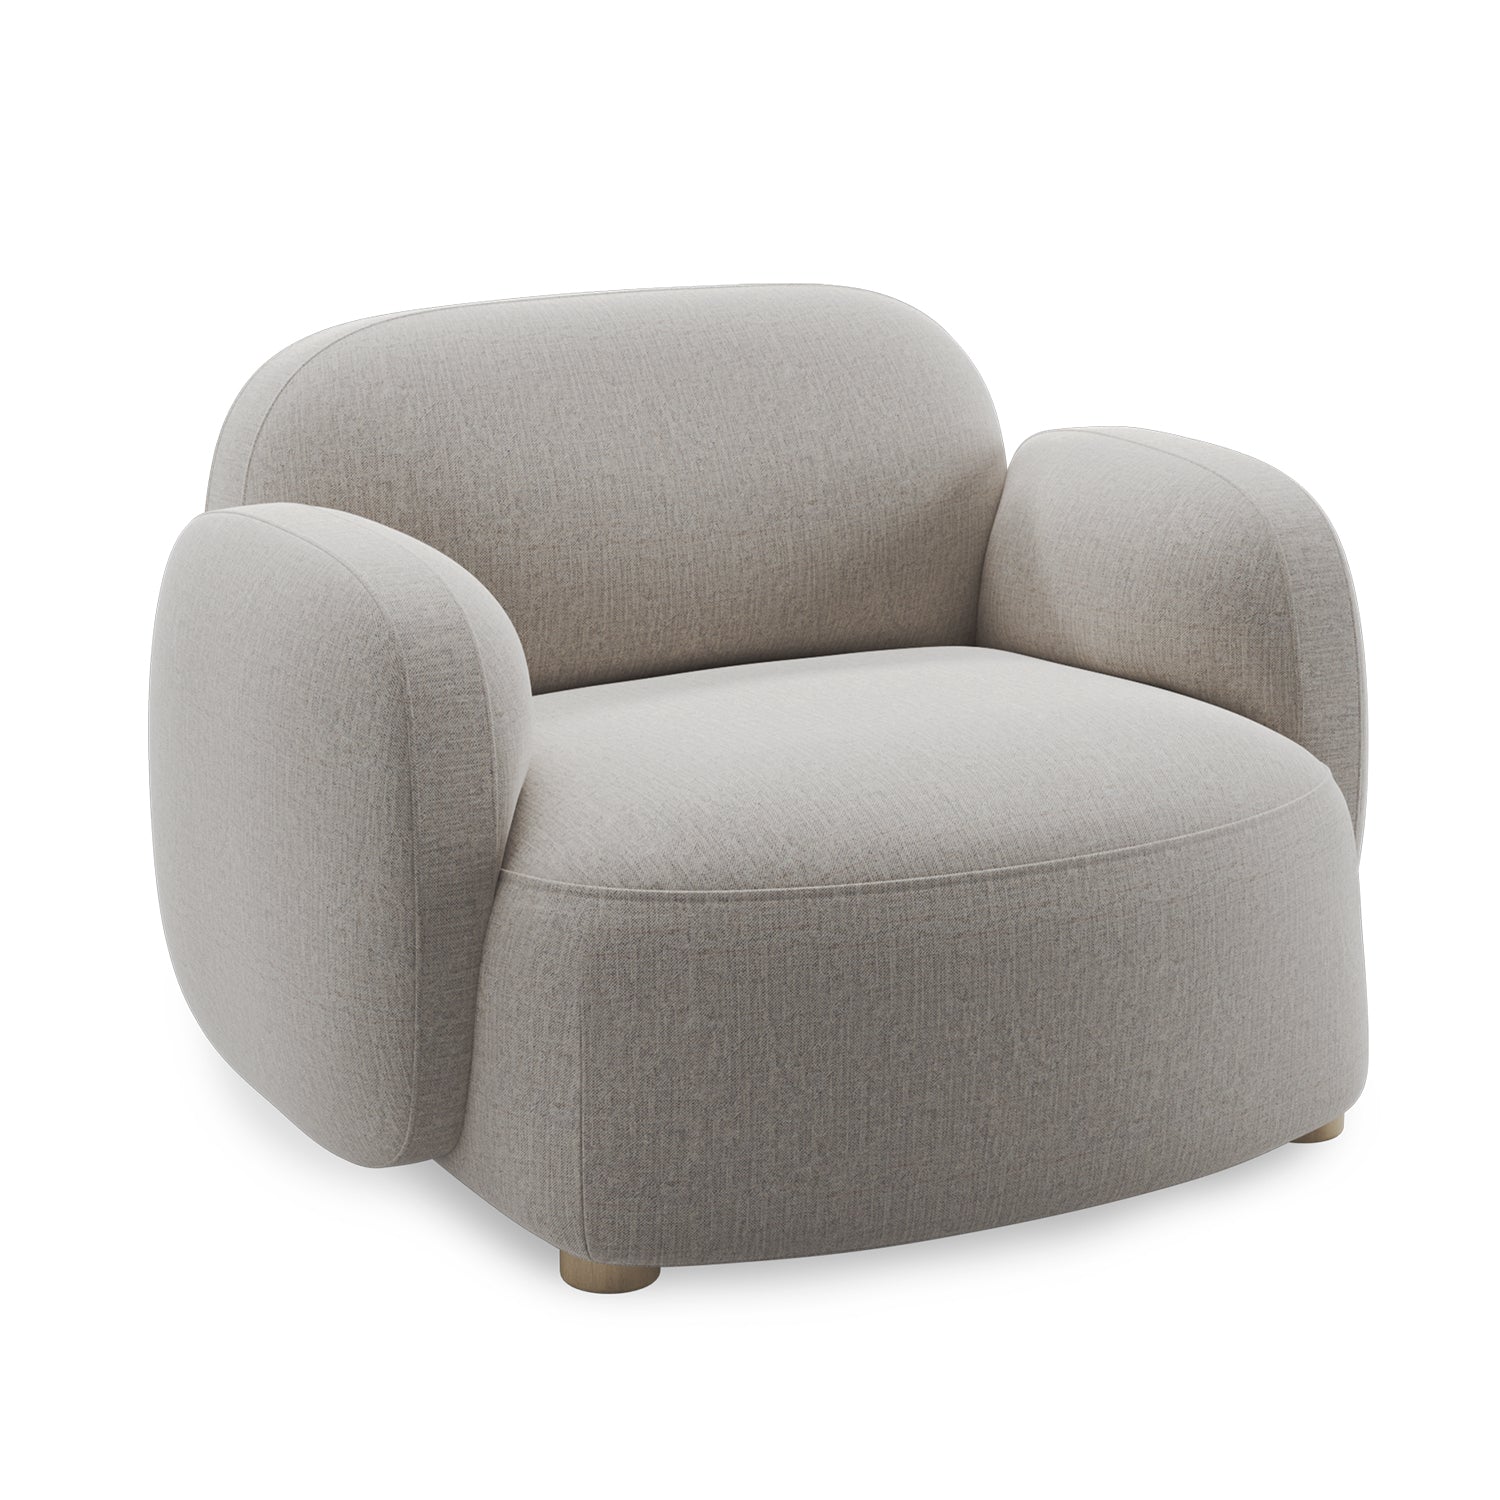 Northern Gem Lounge Chair with Armrest in  Brusvik 02